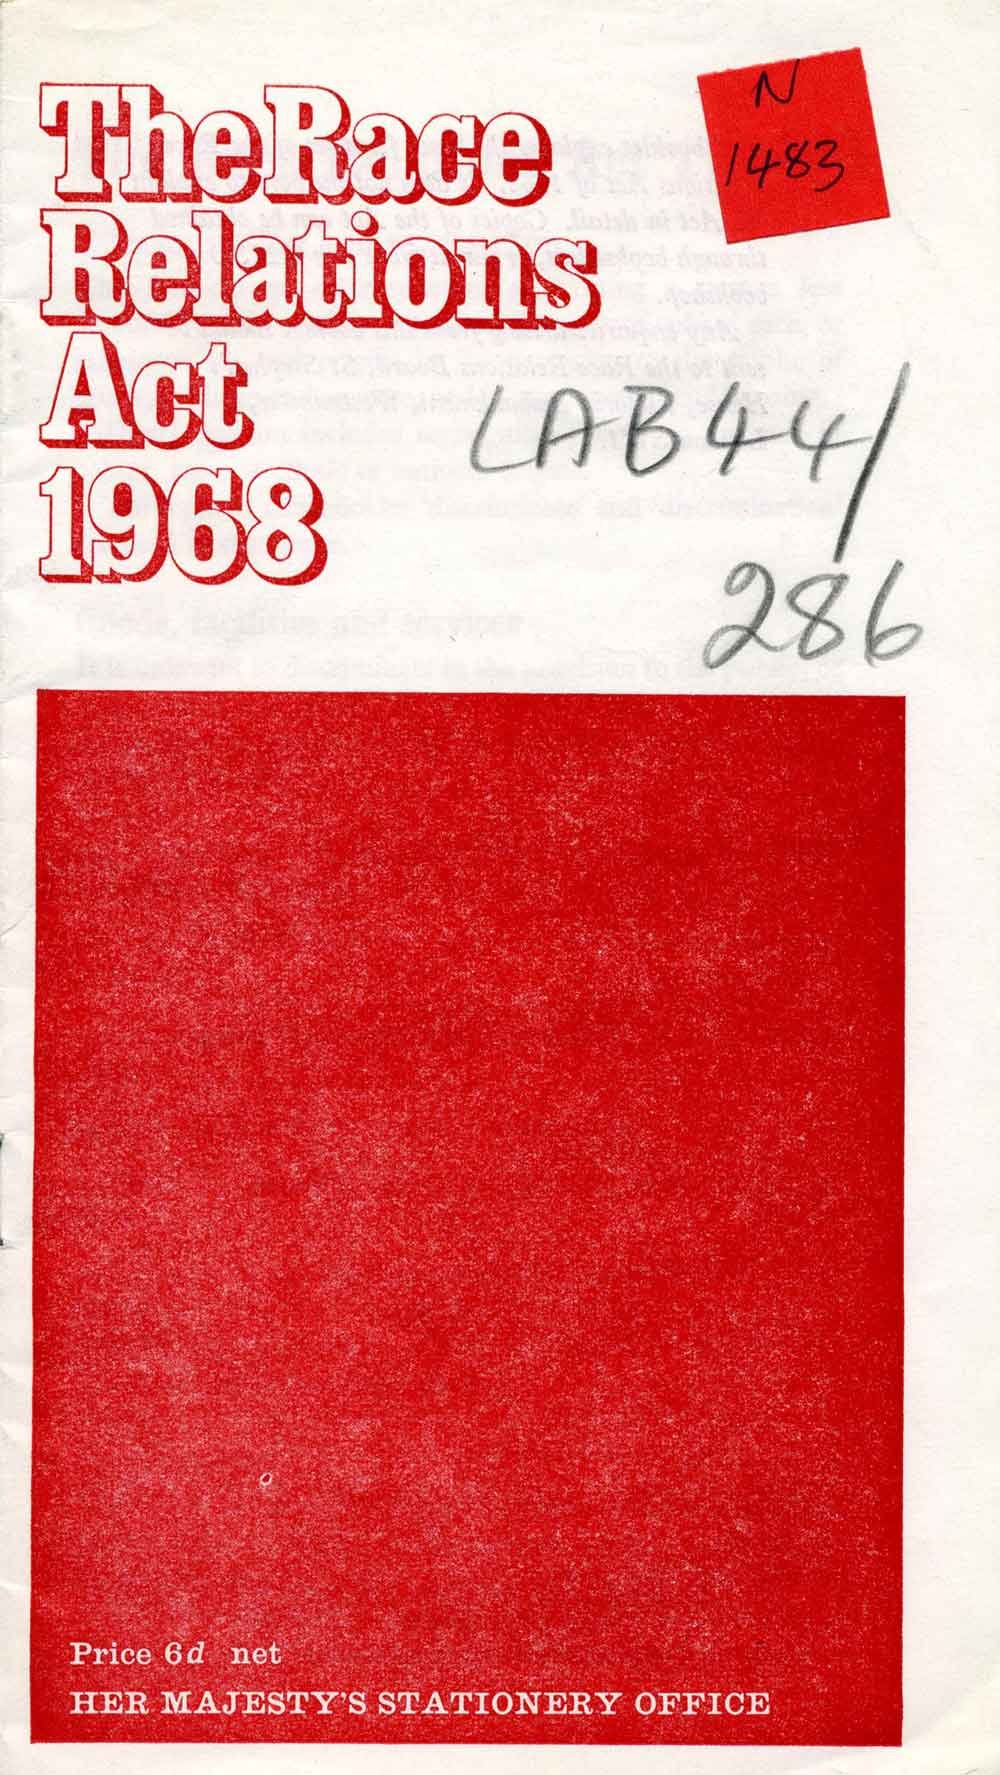 The front cover of a document. The text 'Race Relations Act 1968' is written in bold red text